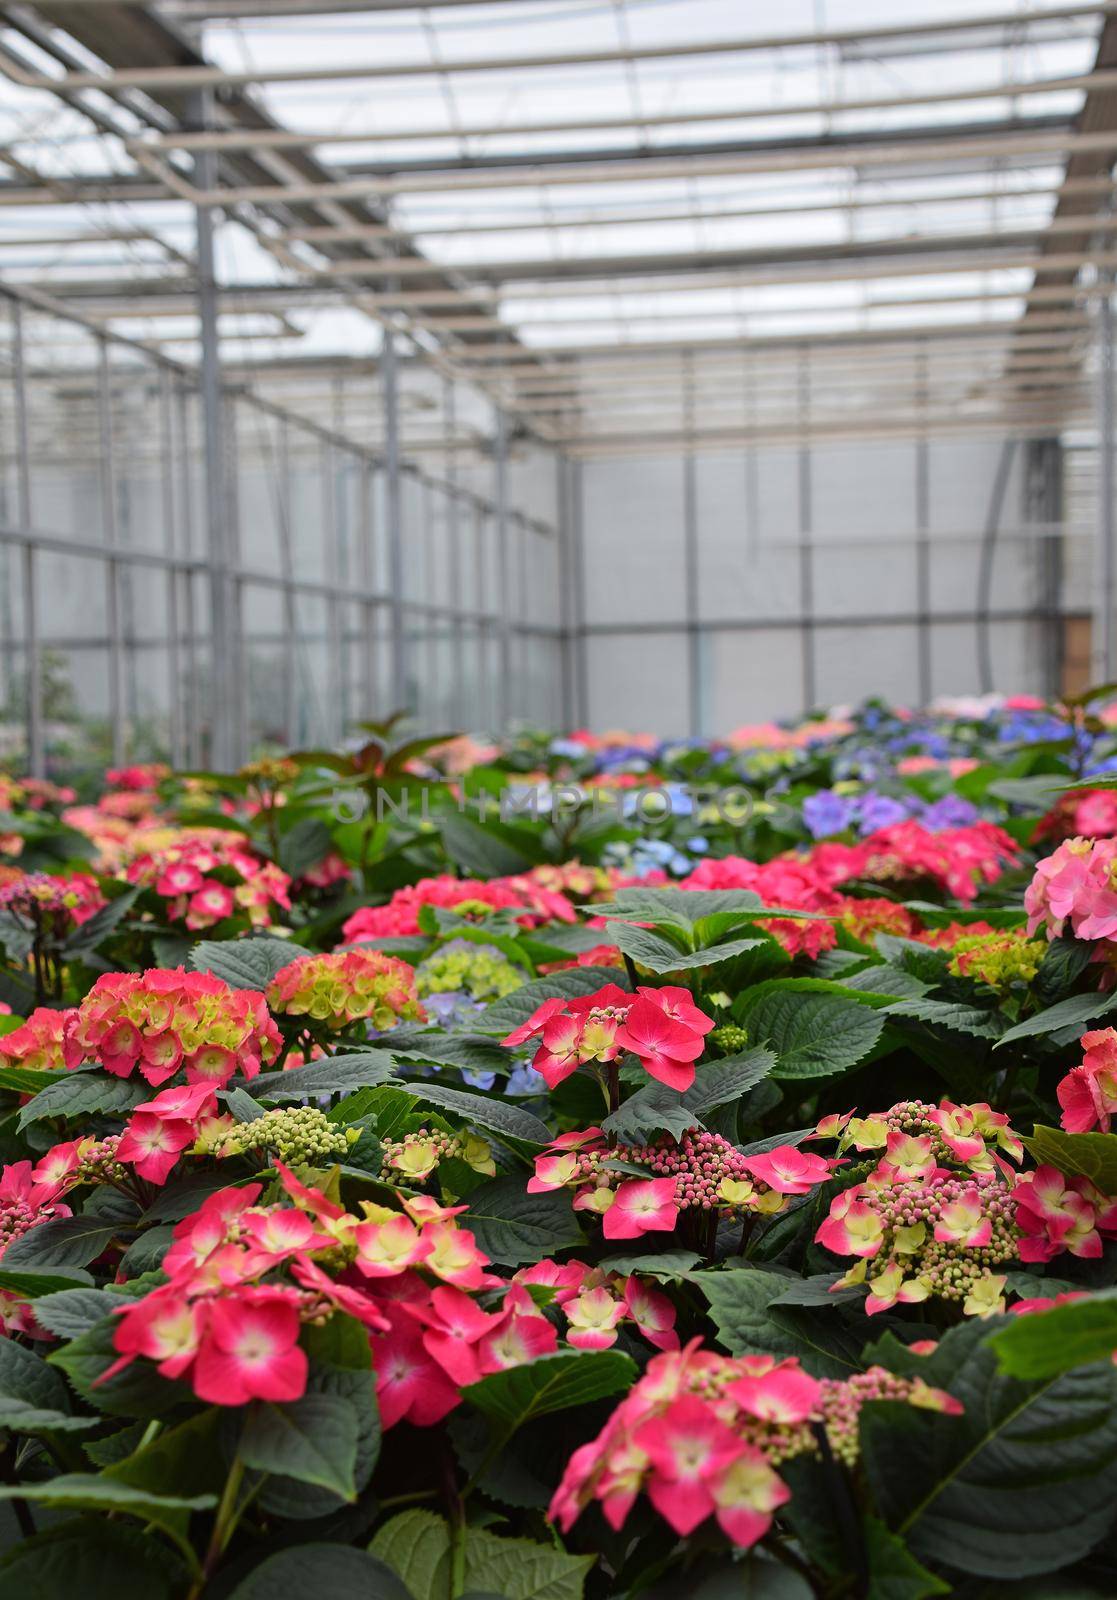 Close up fresh red, purple and pink potted hydrangea or hortensia flowers in greenhouse, high angle view